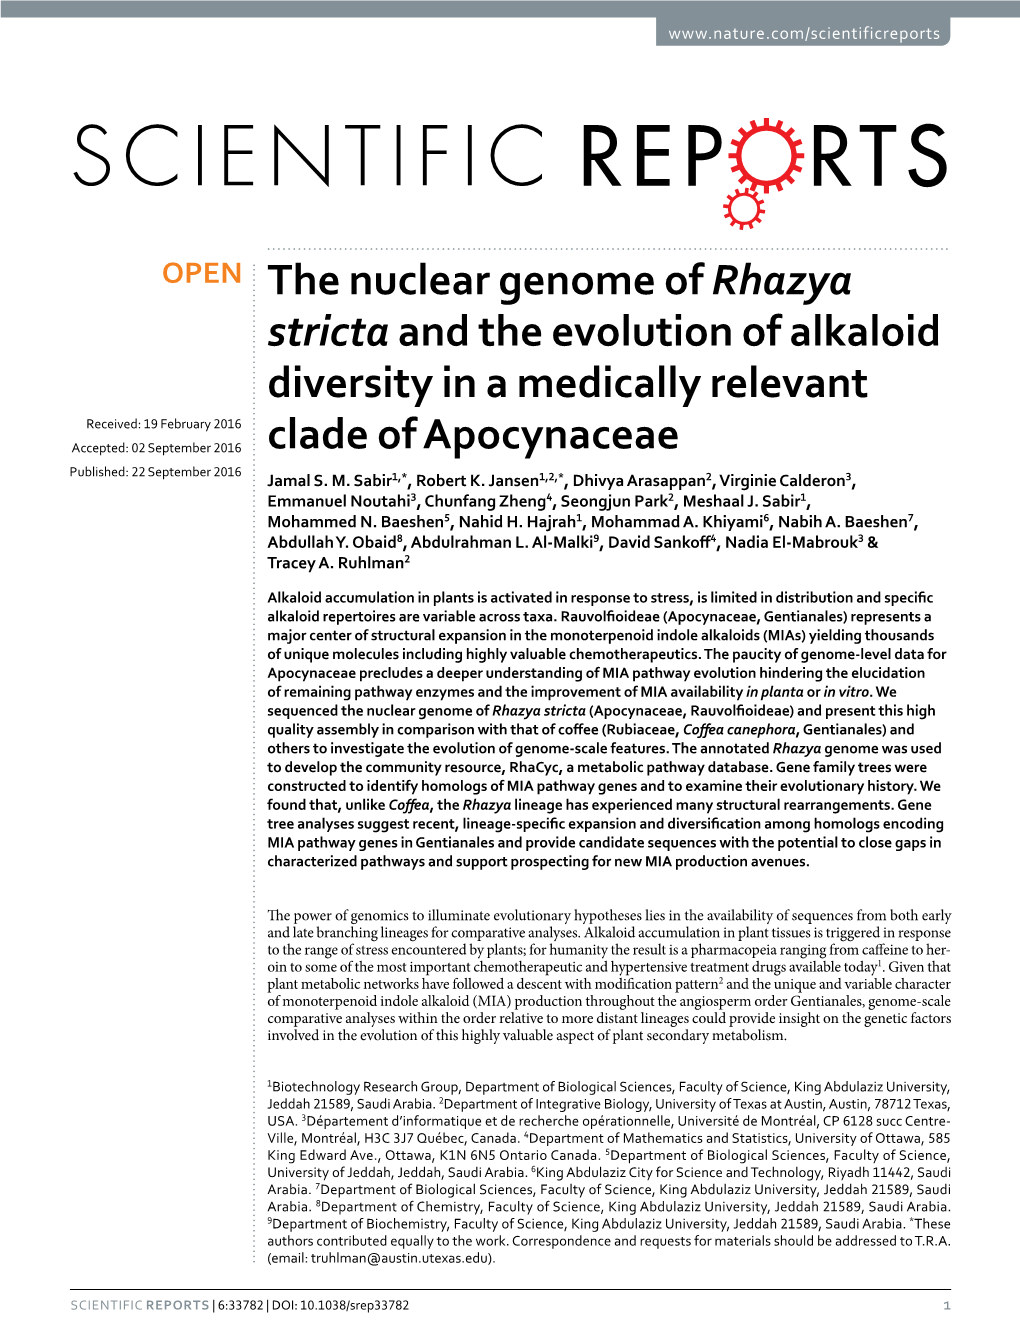 The Nuclear Genome of Rhazya Stricta and the Evolution of Alkaloid